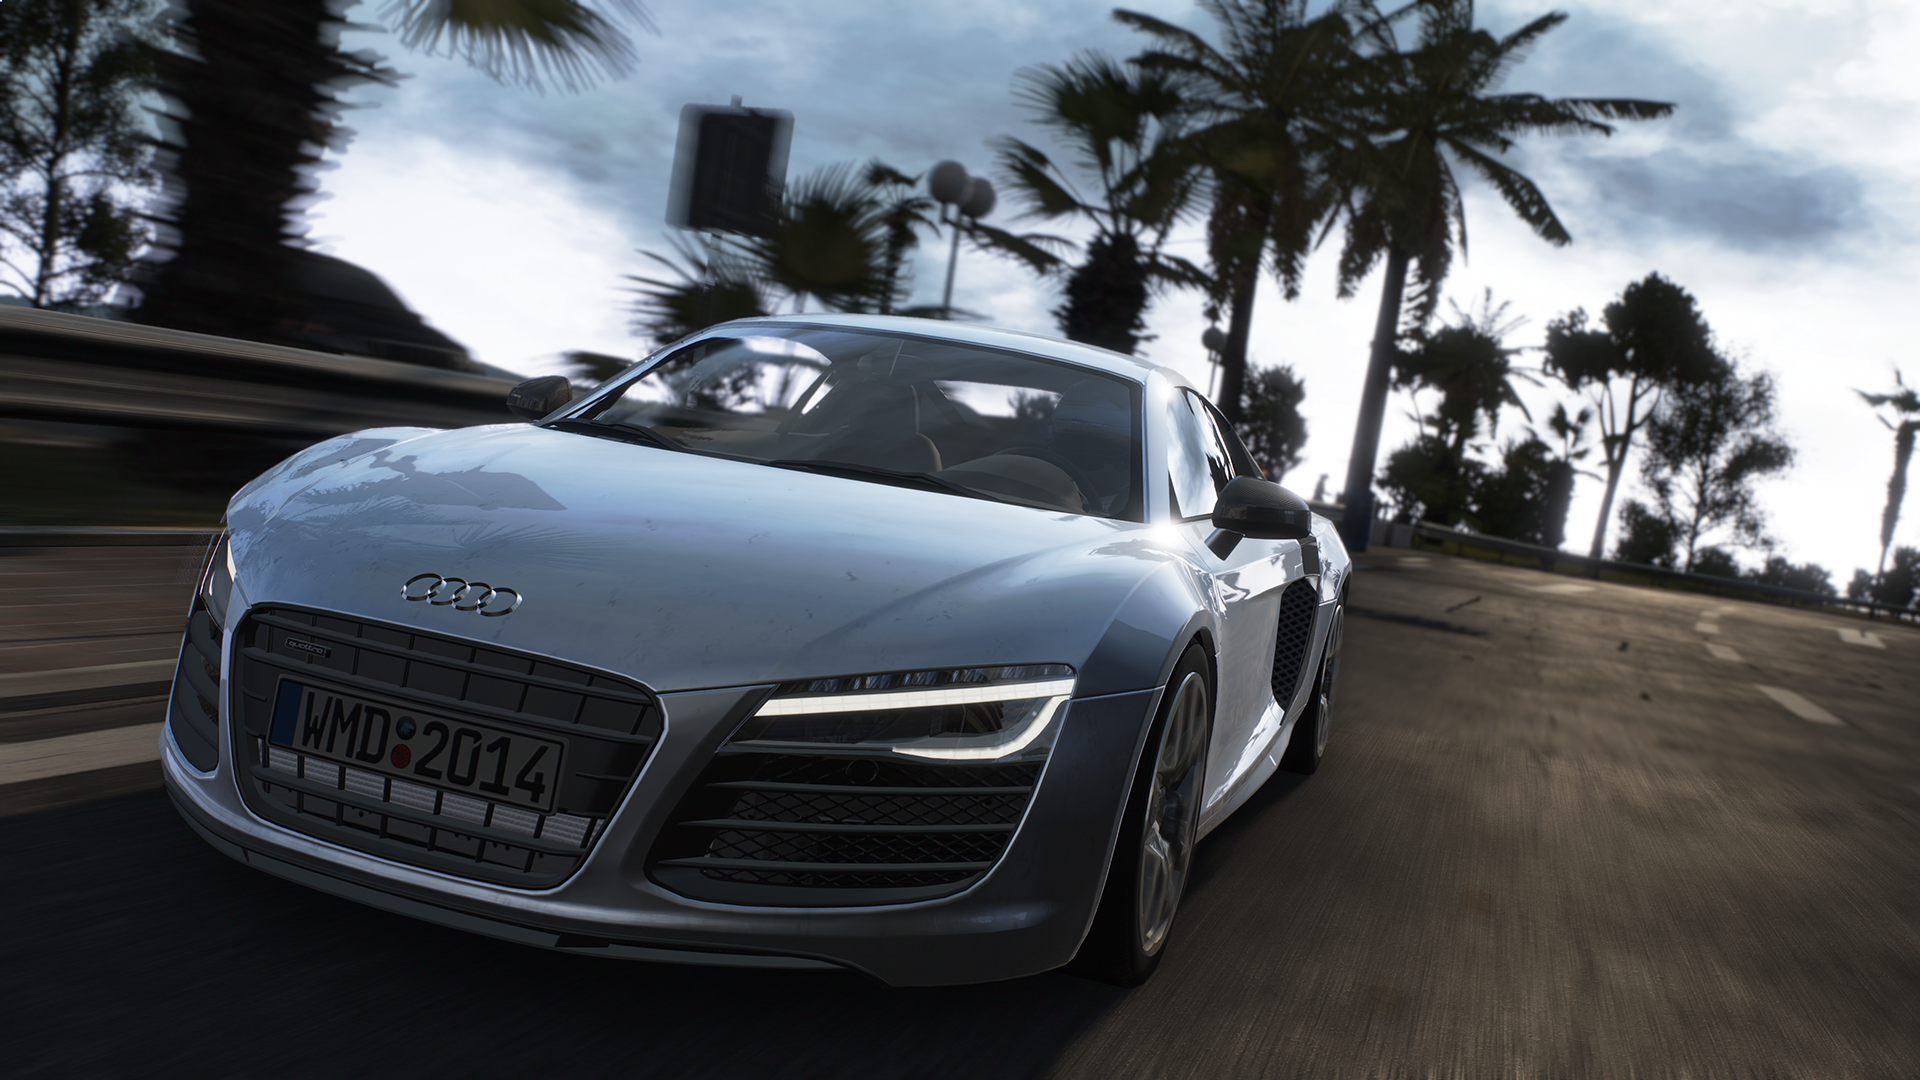 pcars_exe_dx11_20140330_042259_by_roderickartist-d7c6l5r.png